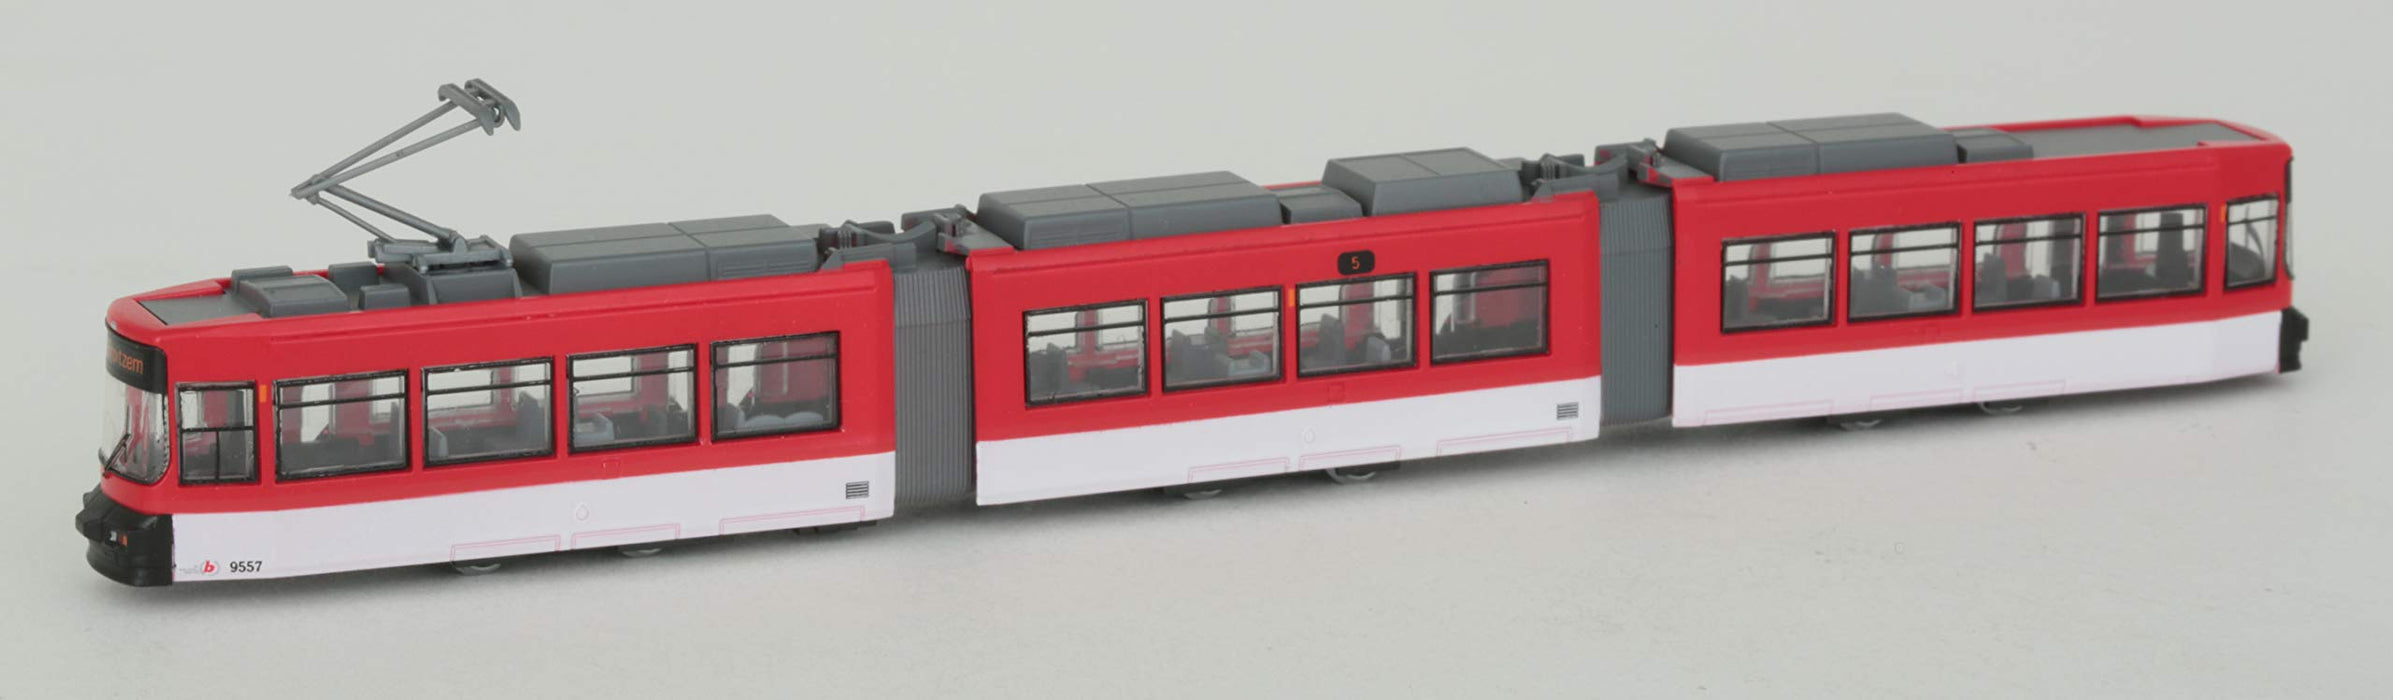 Tomytec Railway Model - Gt6S Type Iron Collection Braunschweigtrum Limited Edition